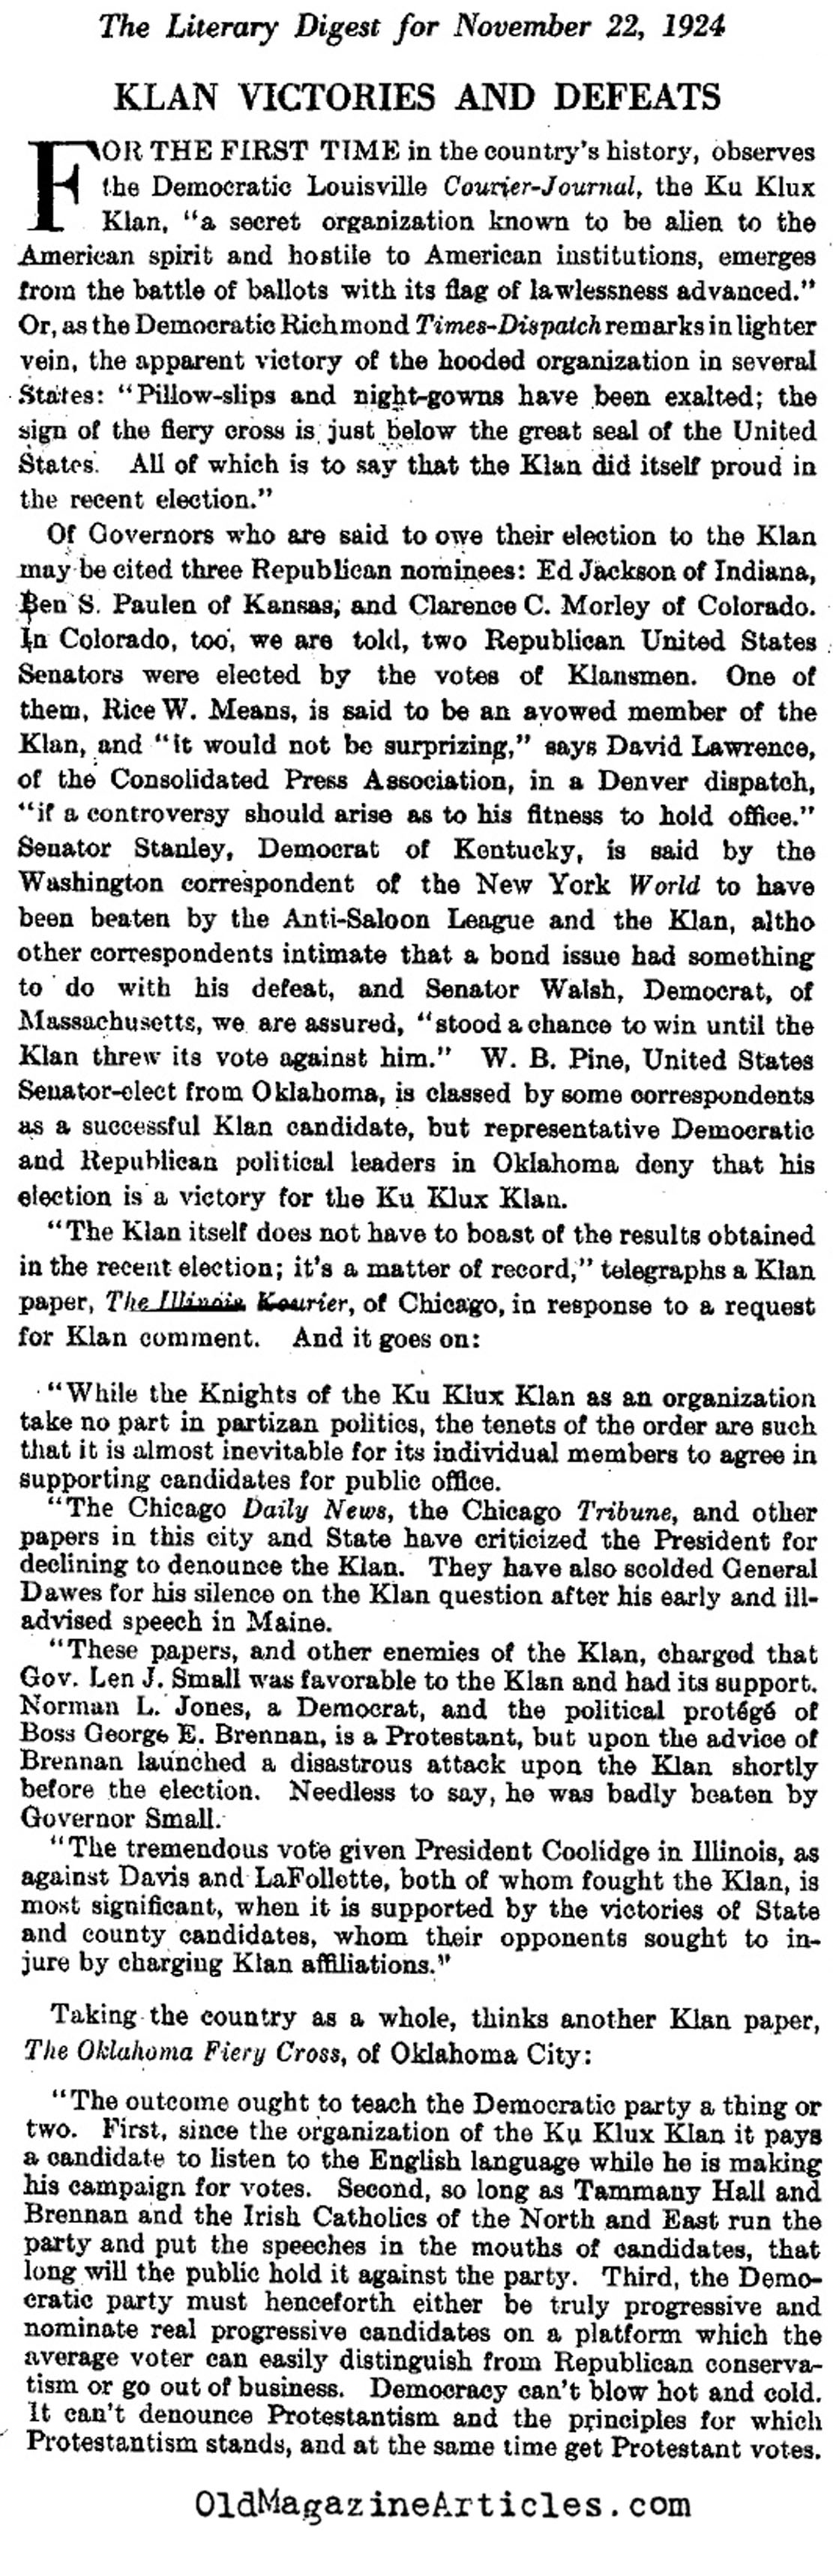 The  KKK Factor and the 1924 Elections (Literary Digest, 1924)